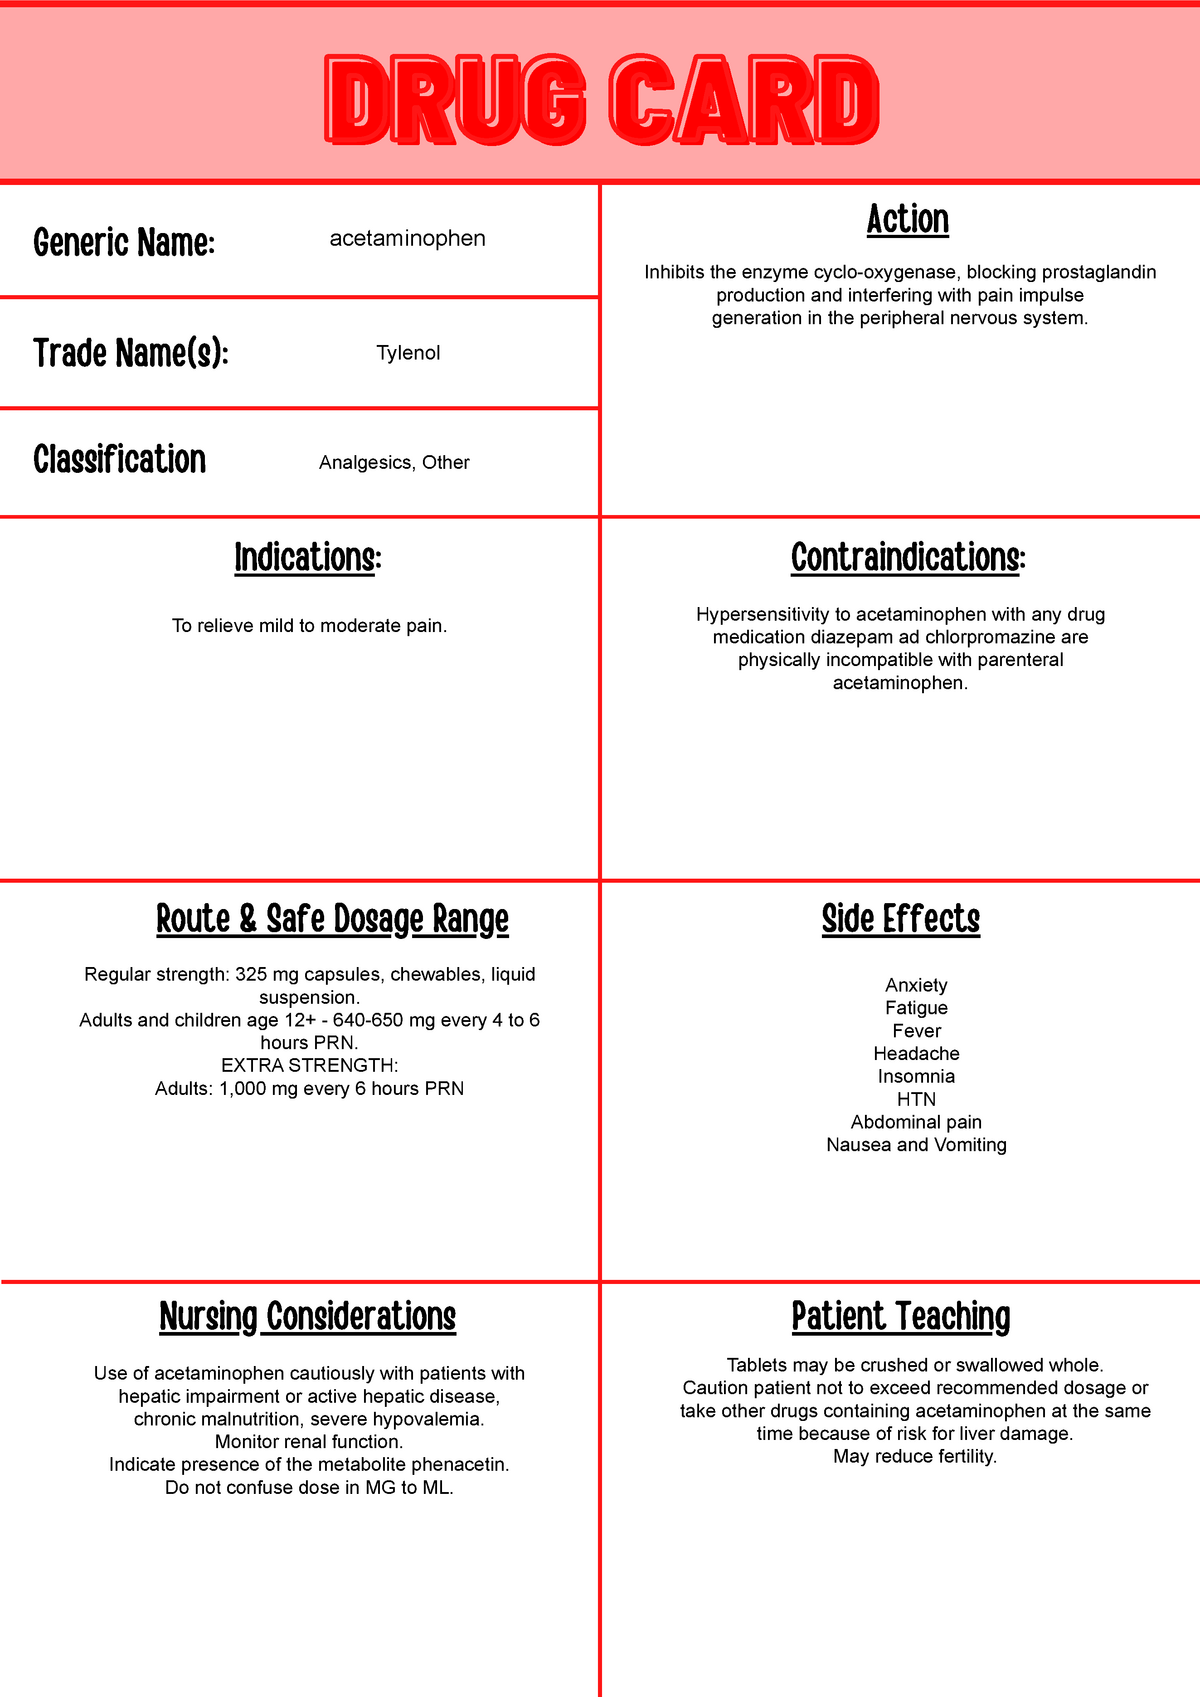 acetaminophen-drug-cards-generic-name-trade-name-s-classification